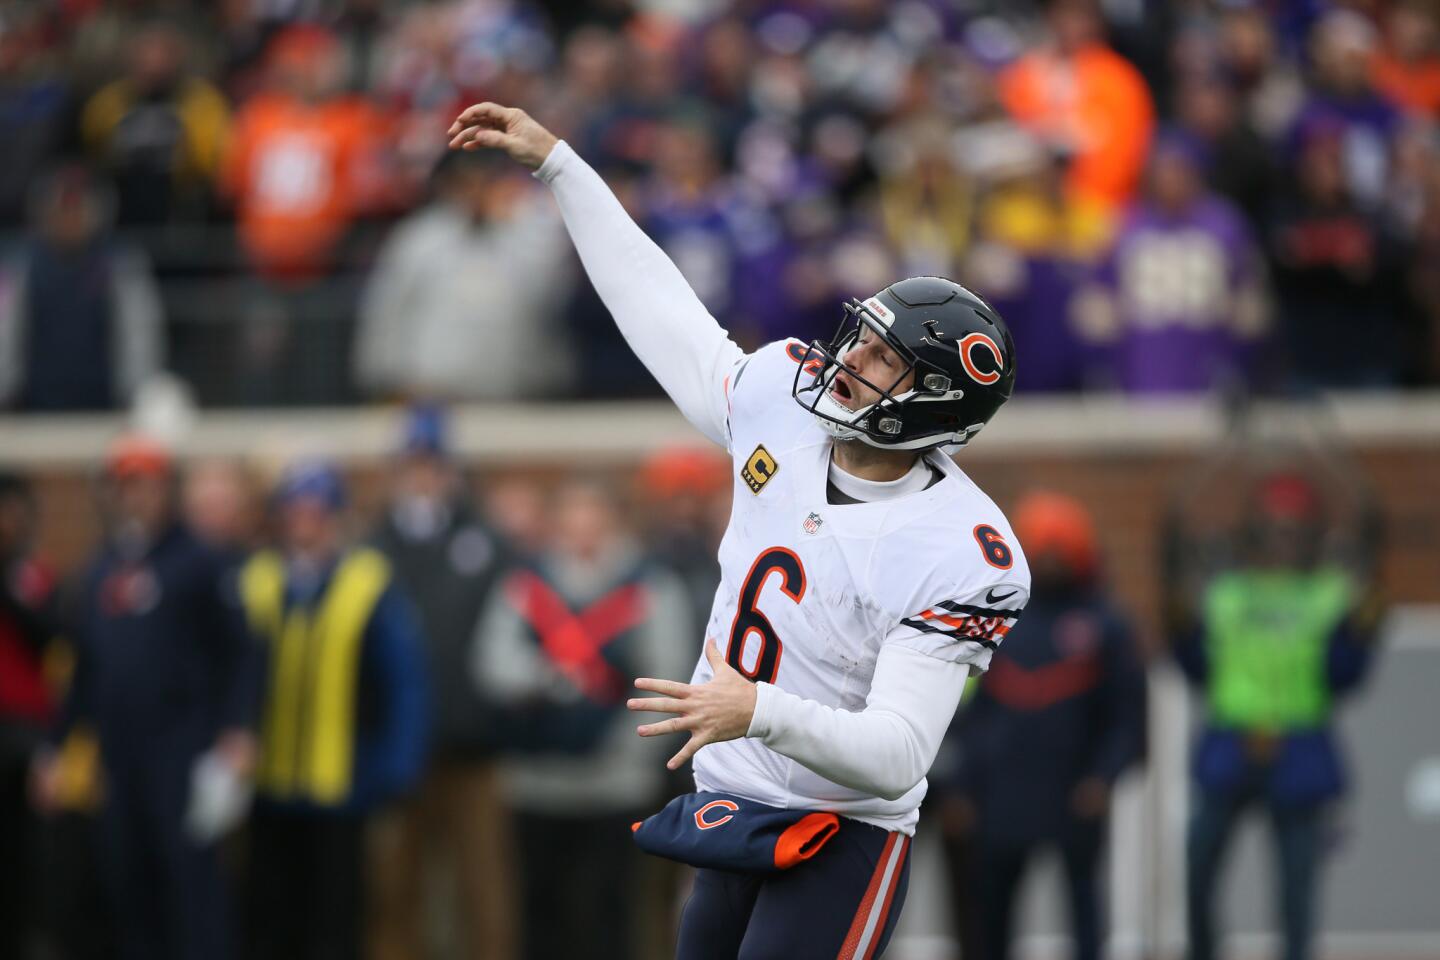 Jay Cutler closes his eyes after throwing a pass during the second half of a game against the Vikings.